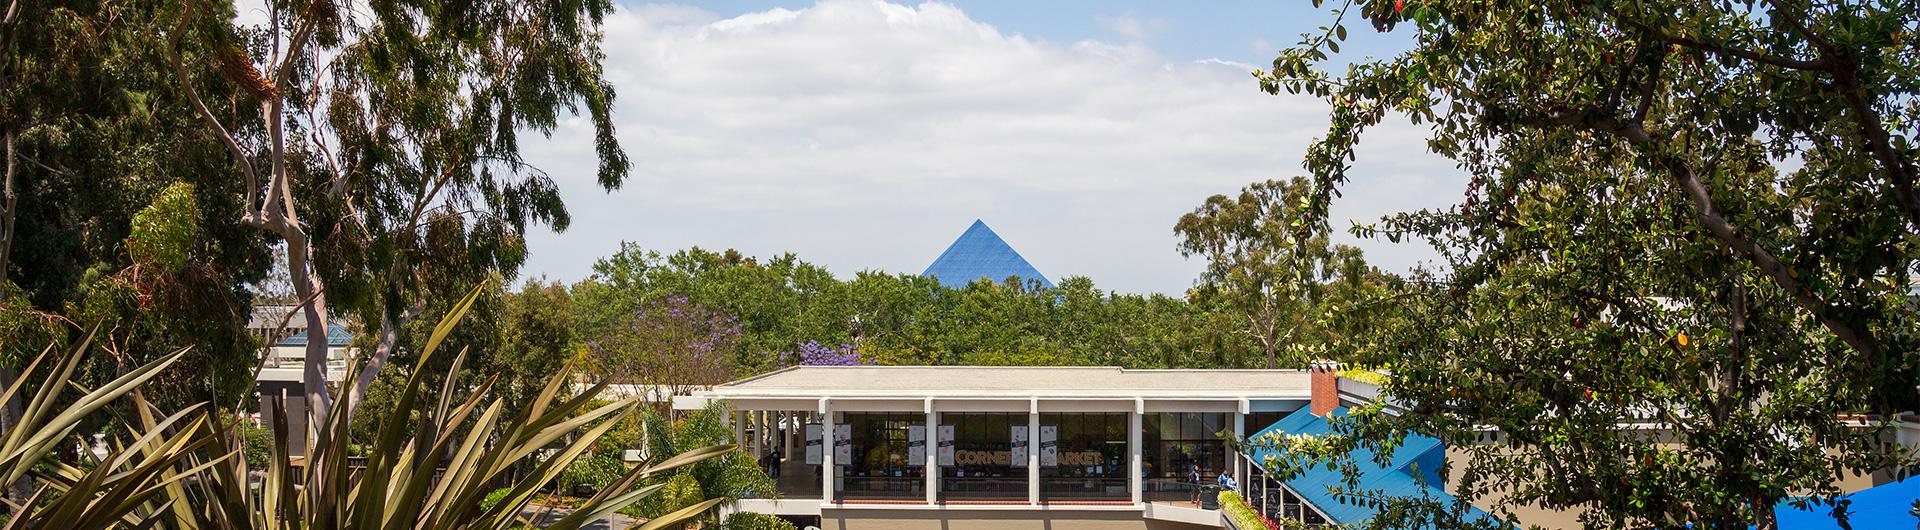 pyramid and student union